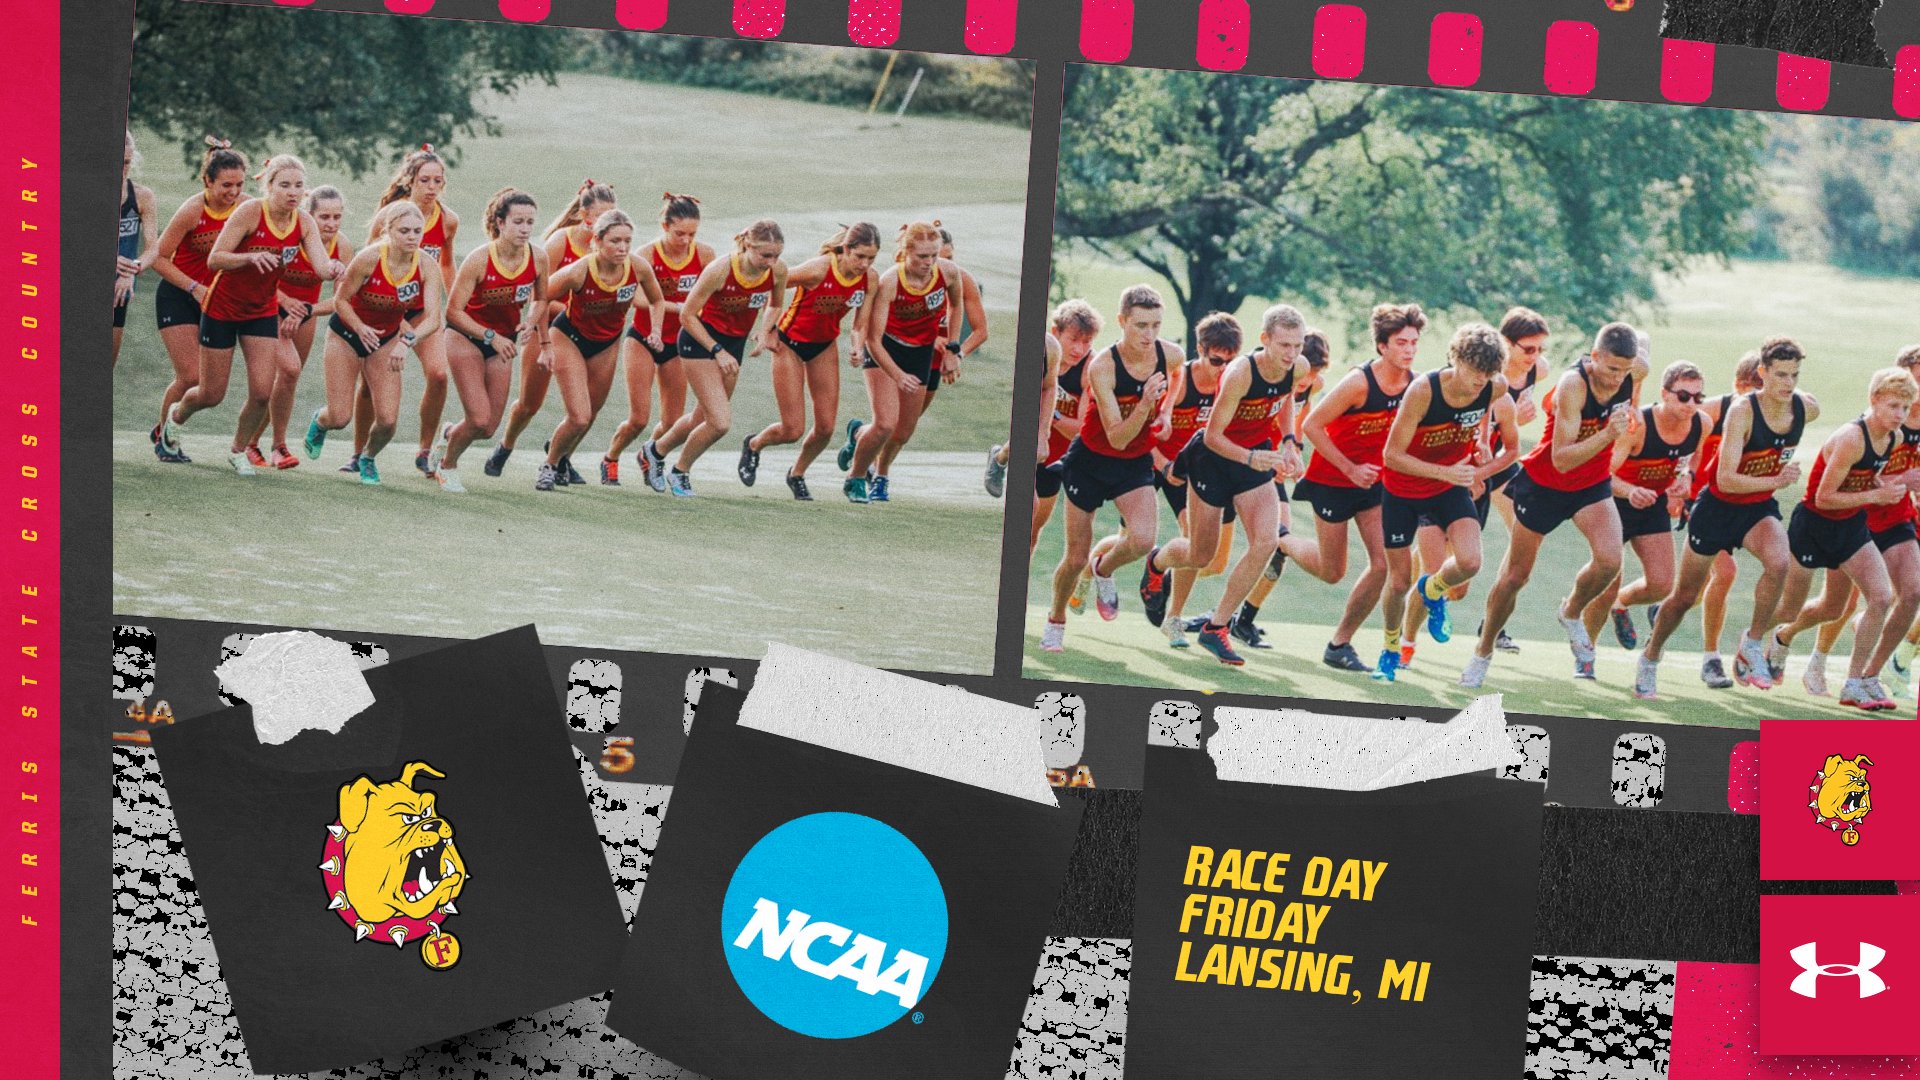 Ferris State Cross Country Athletes Open Weekend Action At Lansing CC Invite